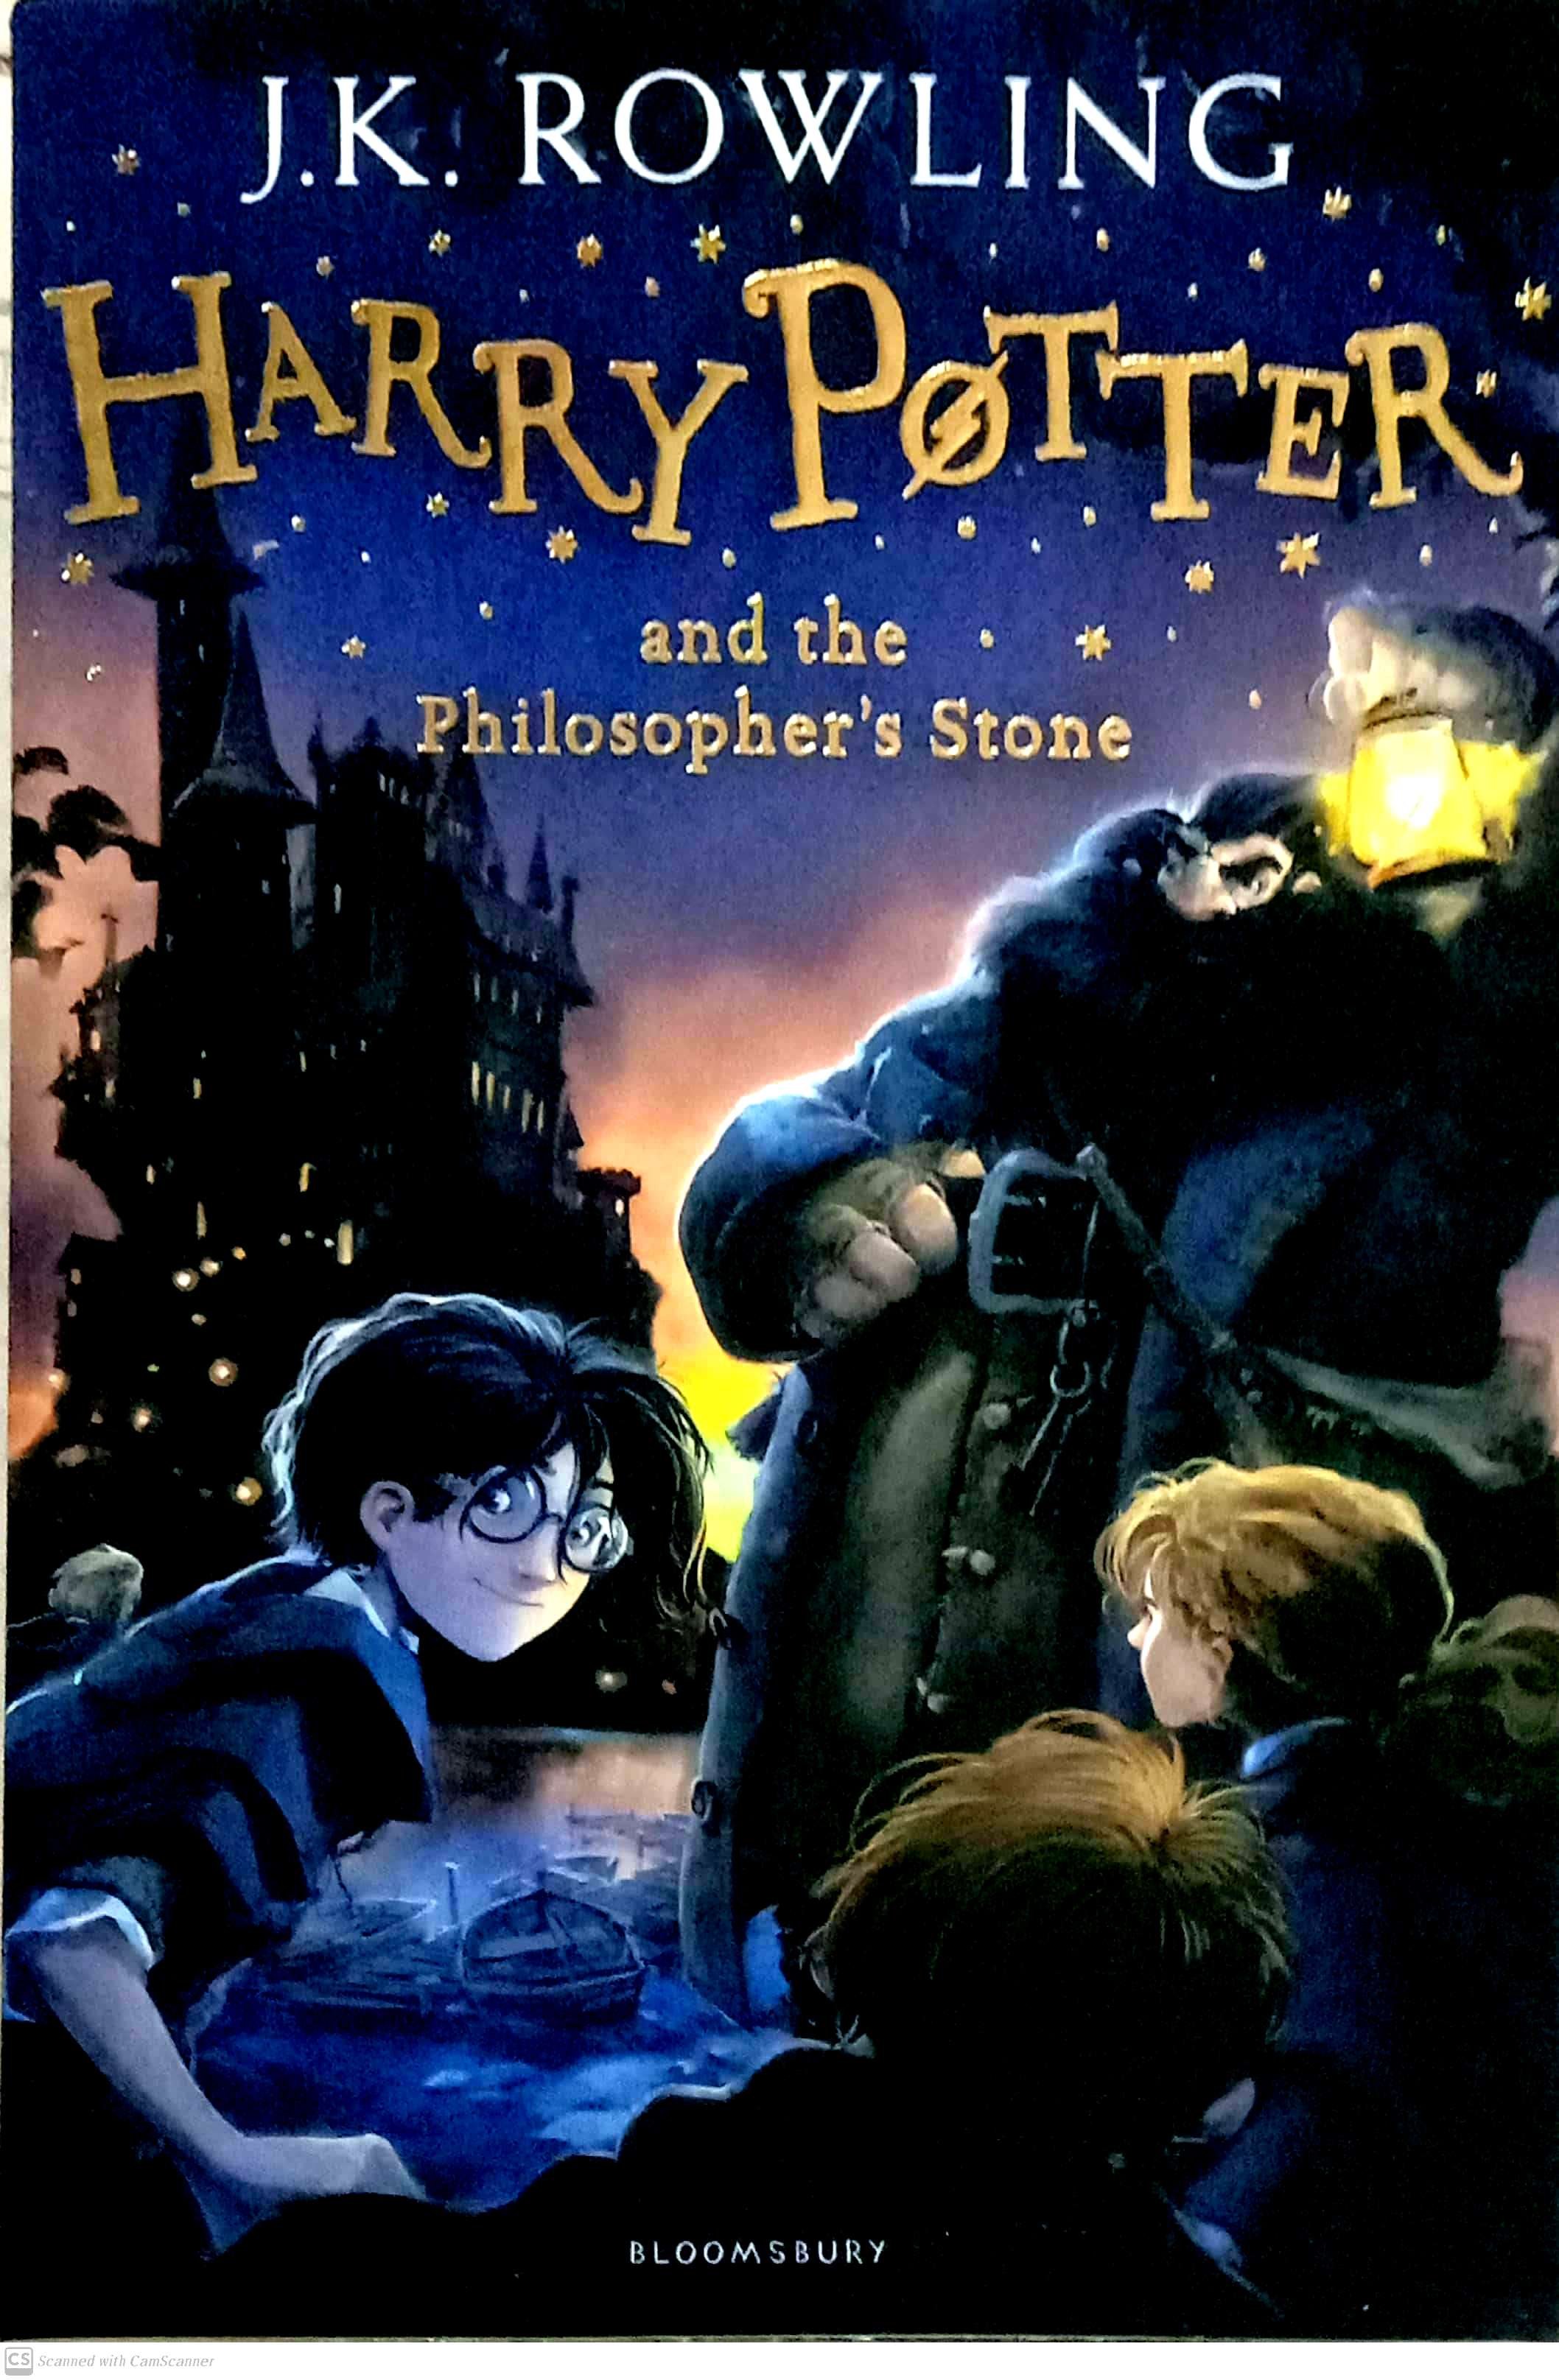 harry potter and the philosopher's stone full book review